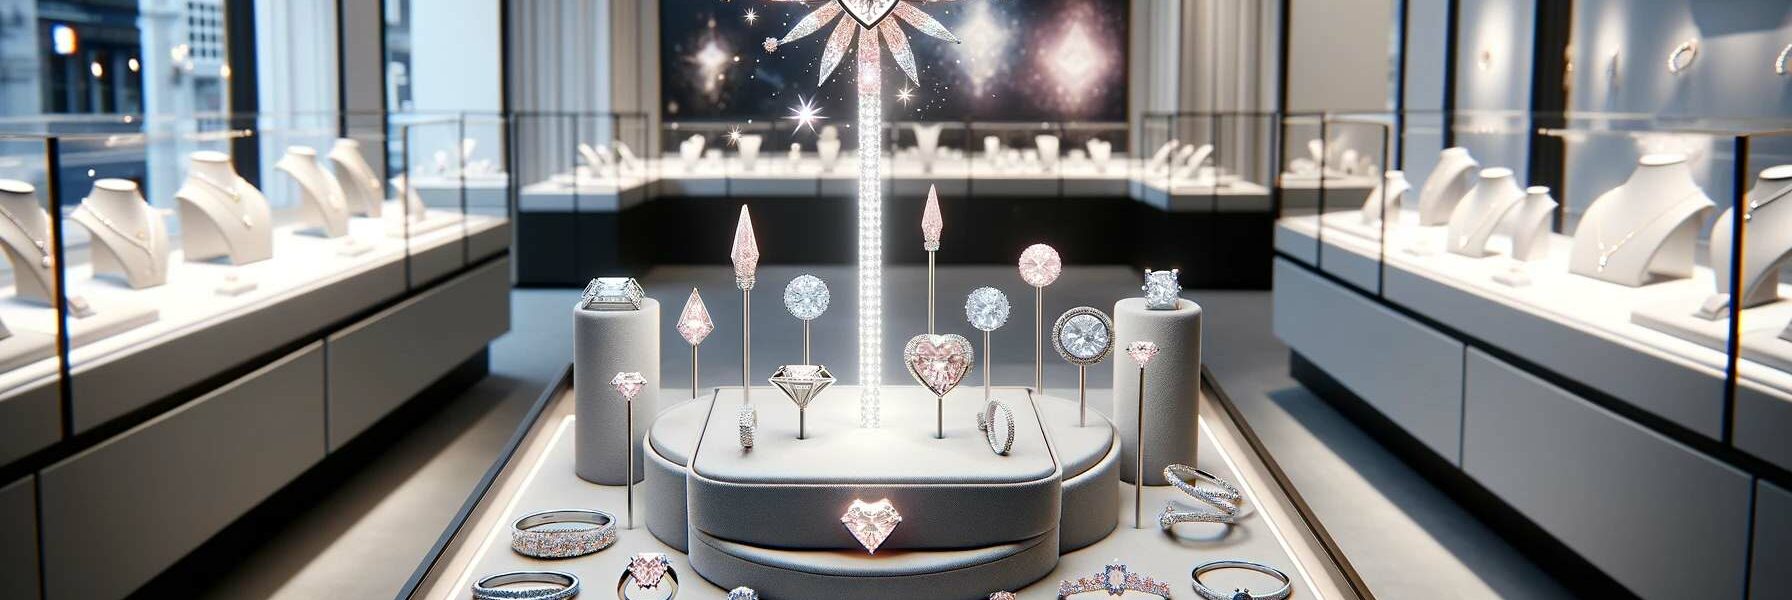 Luxurious, Text-Free Jewelry Display In A 16:9 Aspect Ratio Featuring The Lightbox X Roseate Light Wand Pendant With Lab-Grown Diamonds, Surrounded By The Joy Collection In A Modern Store Environment.